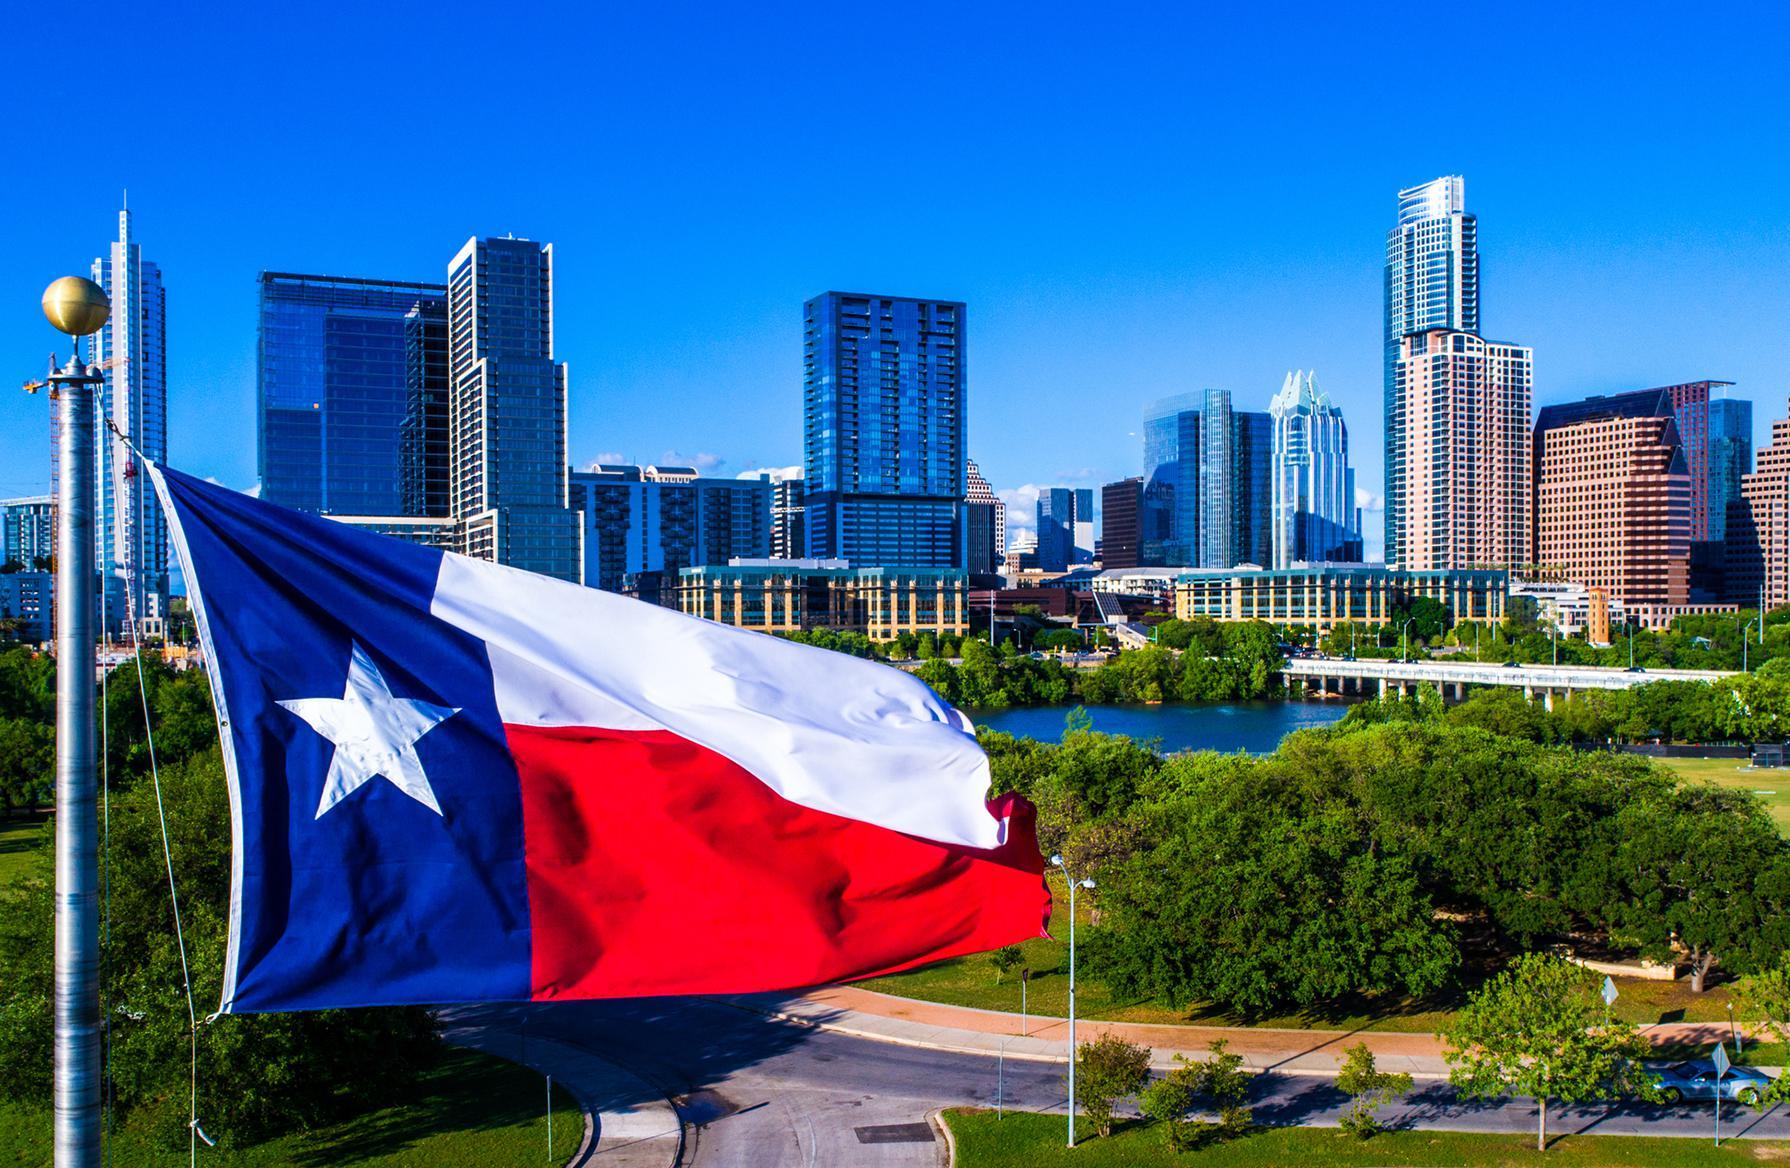 IN TEXAS, ELECTRICITY BILLS CAN BE PAID IN CRYPTOCURRENCY